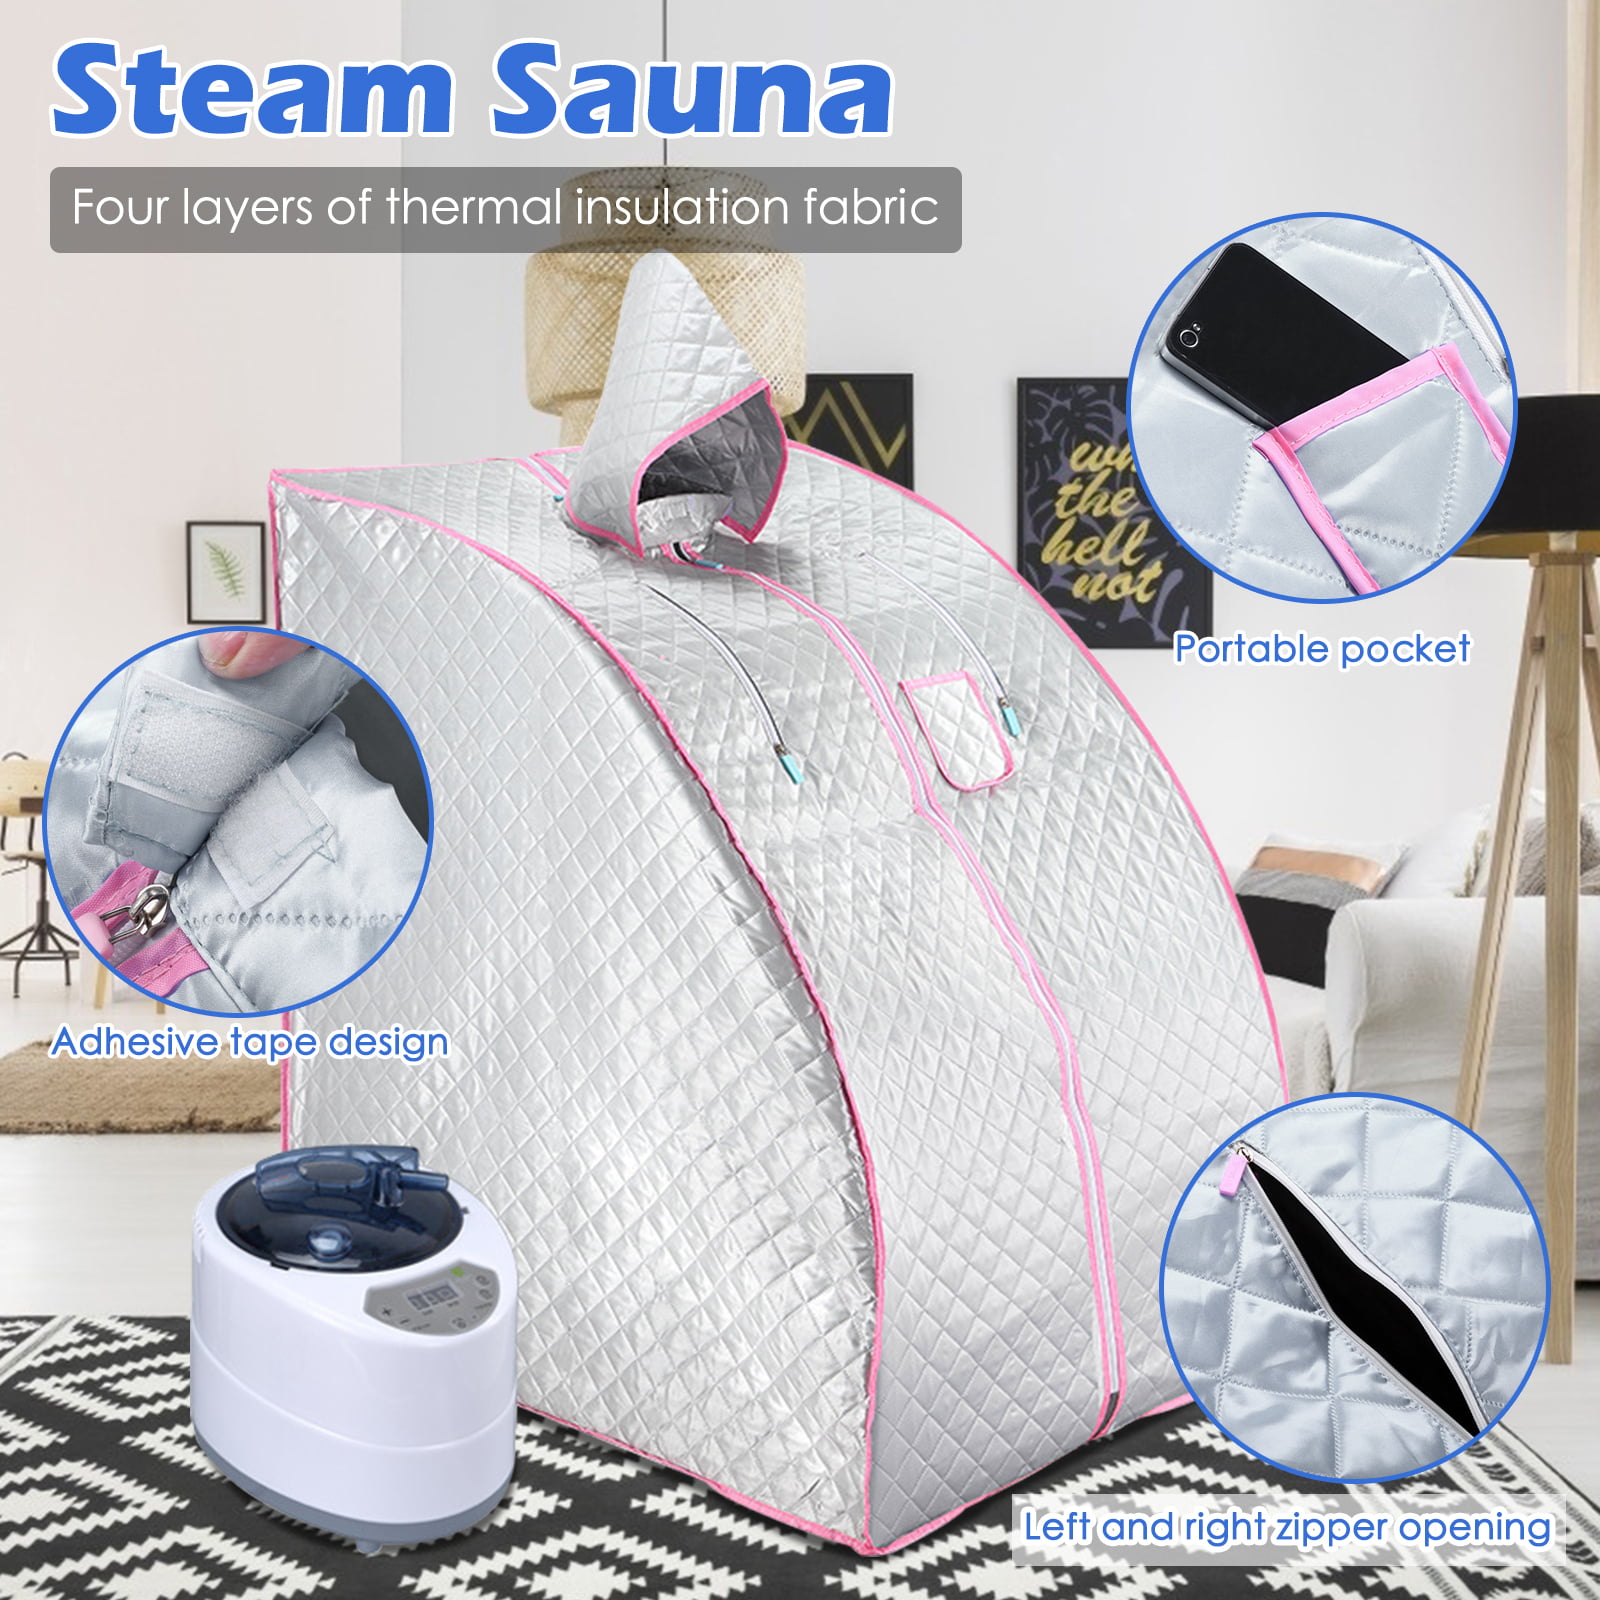 Details about   Portable Steam Sauna Home Full Body Spa Tent Steamer Weight Loss Detox 2 B 28 